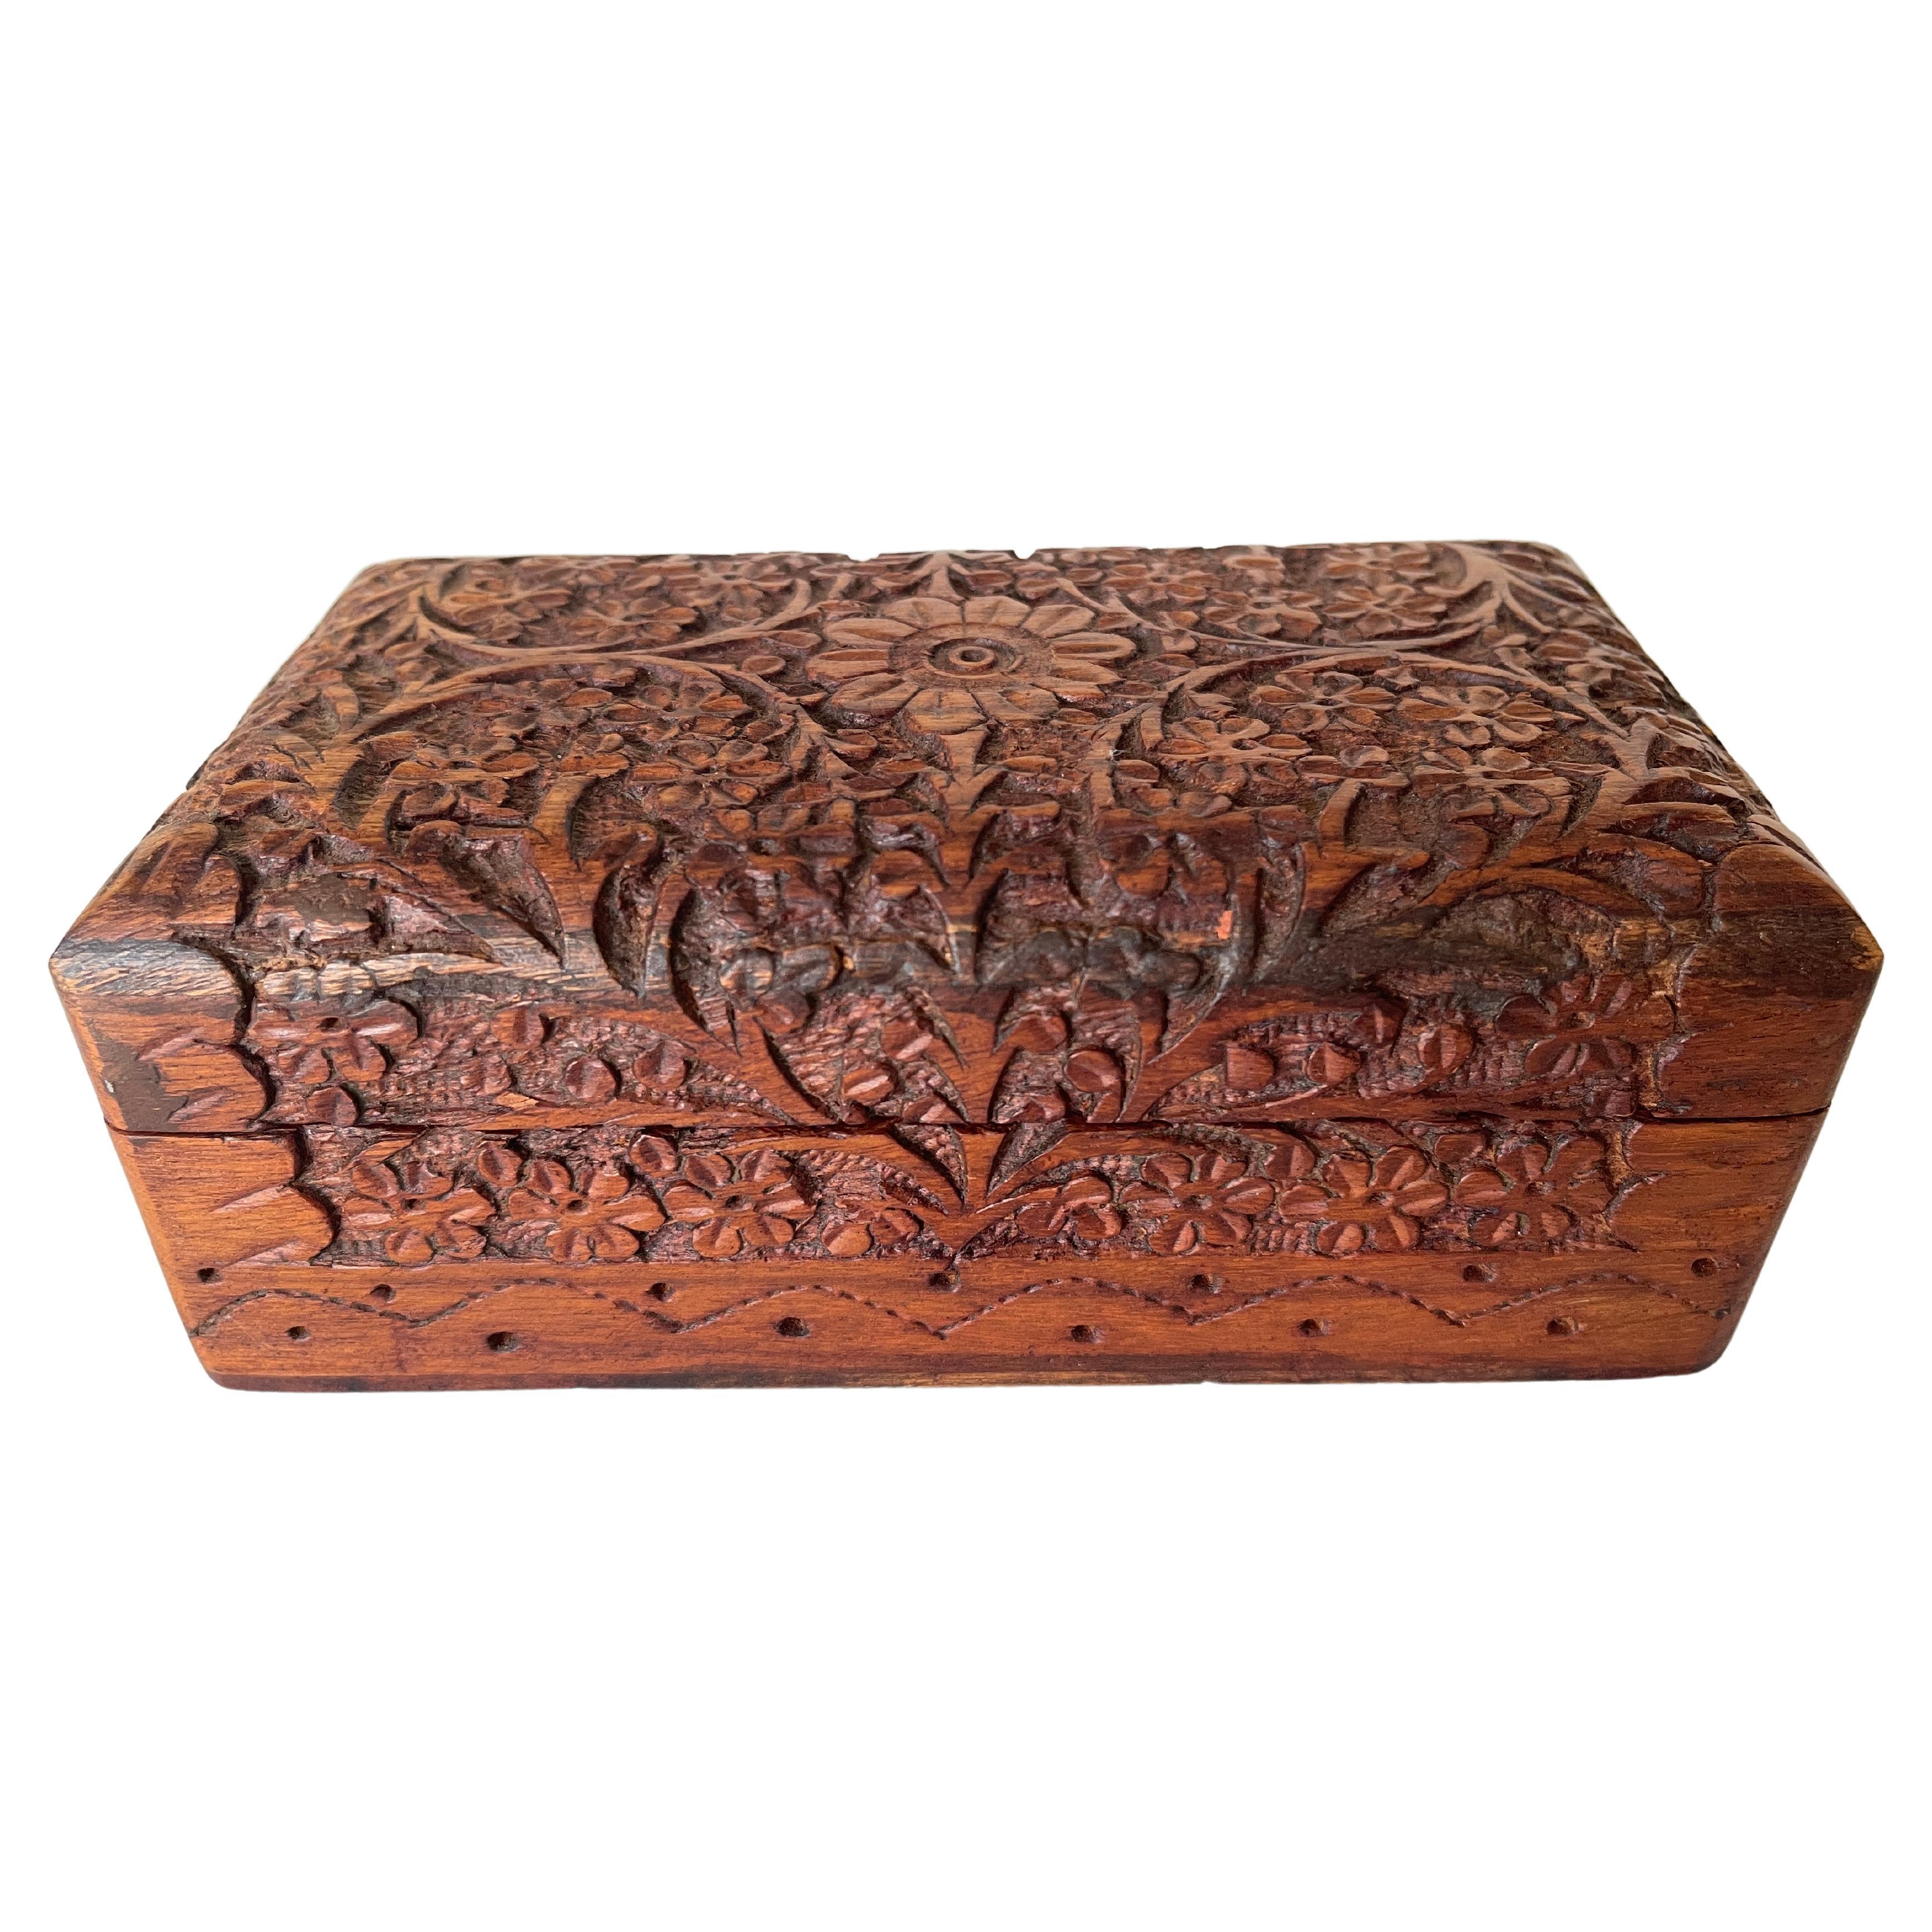 Details about   Wood Antique Mughal Design Home Decorative Gift Boxes 